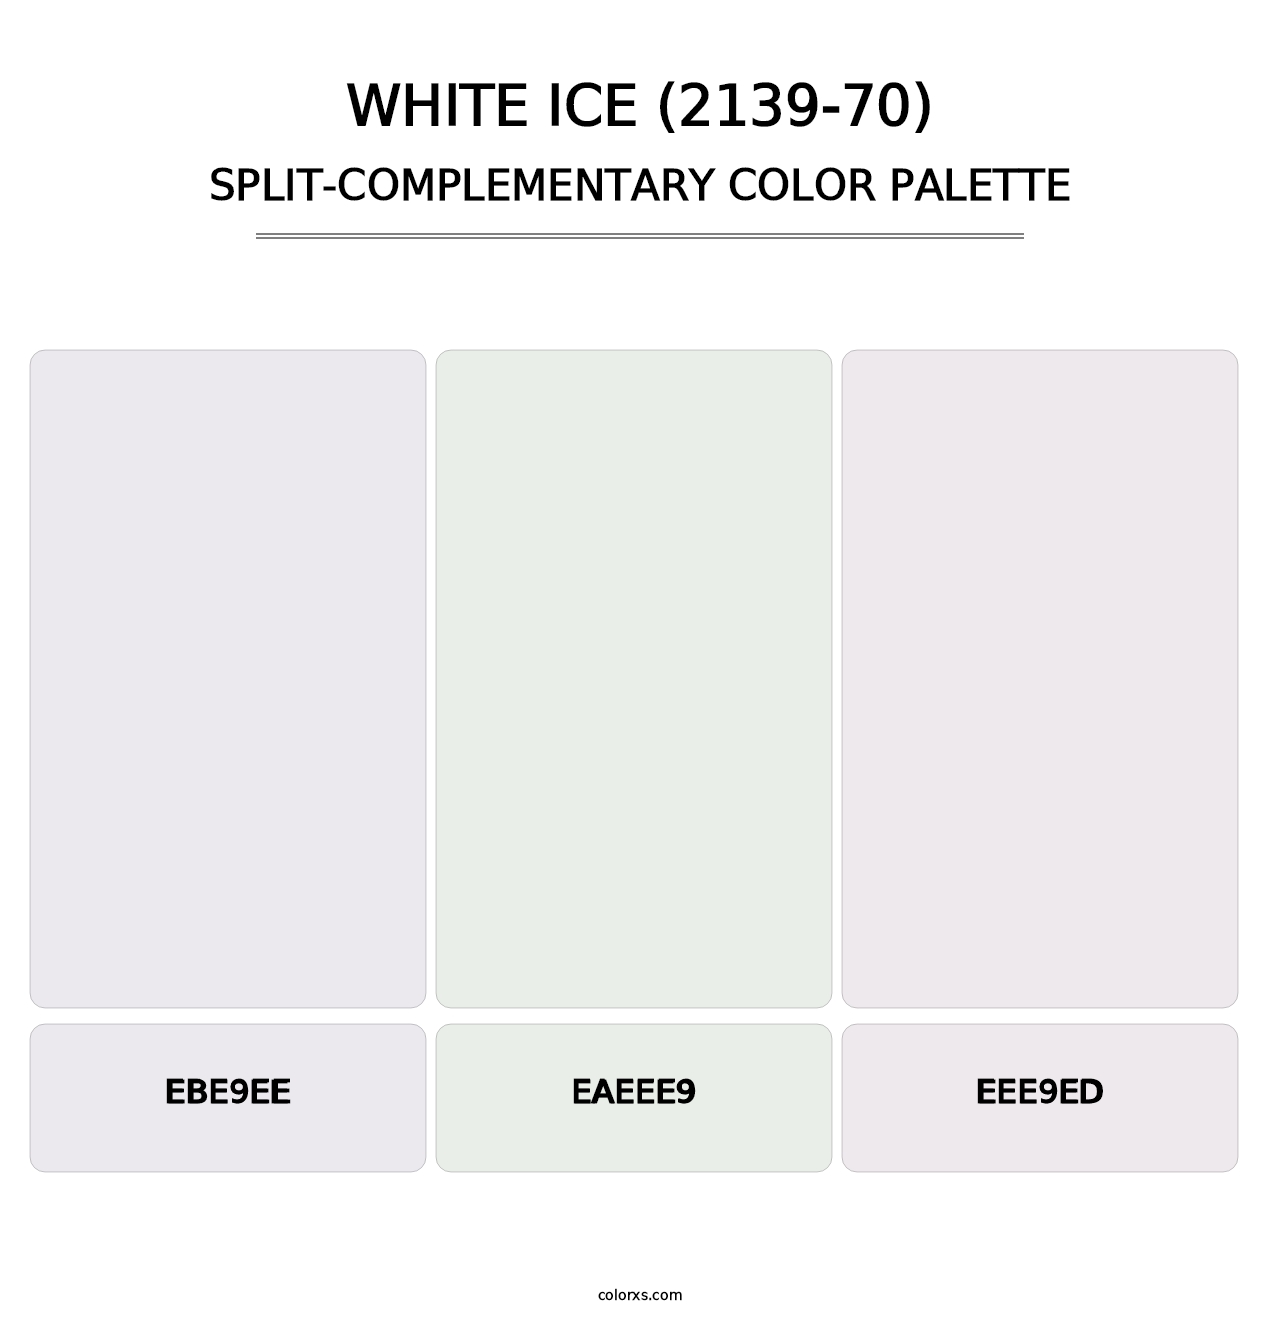 White Ice (2139-70) - Split-Complementary Color Palette